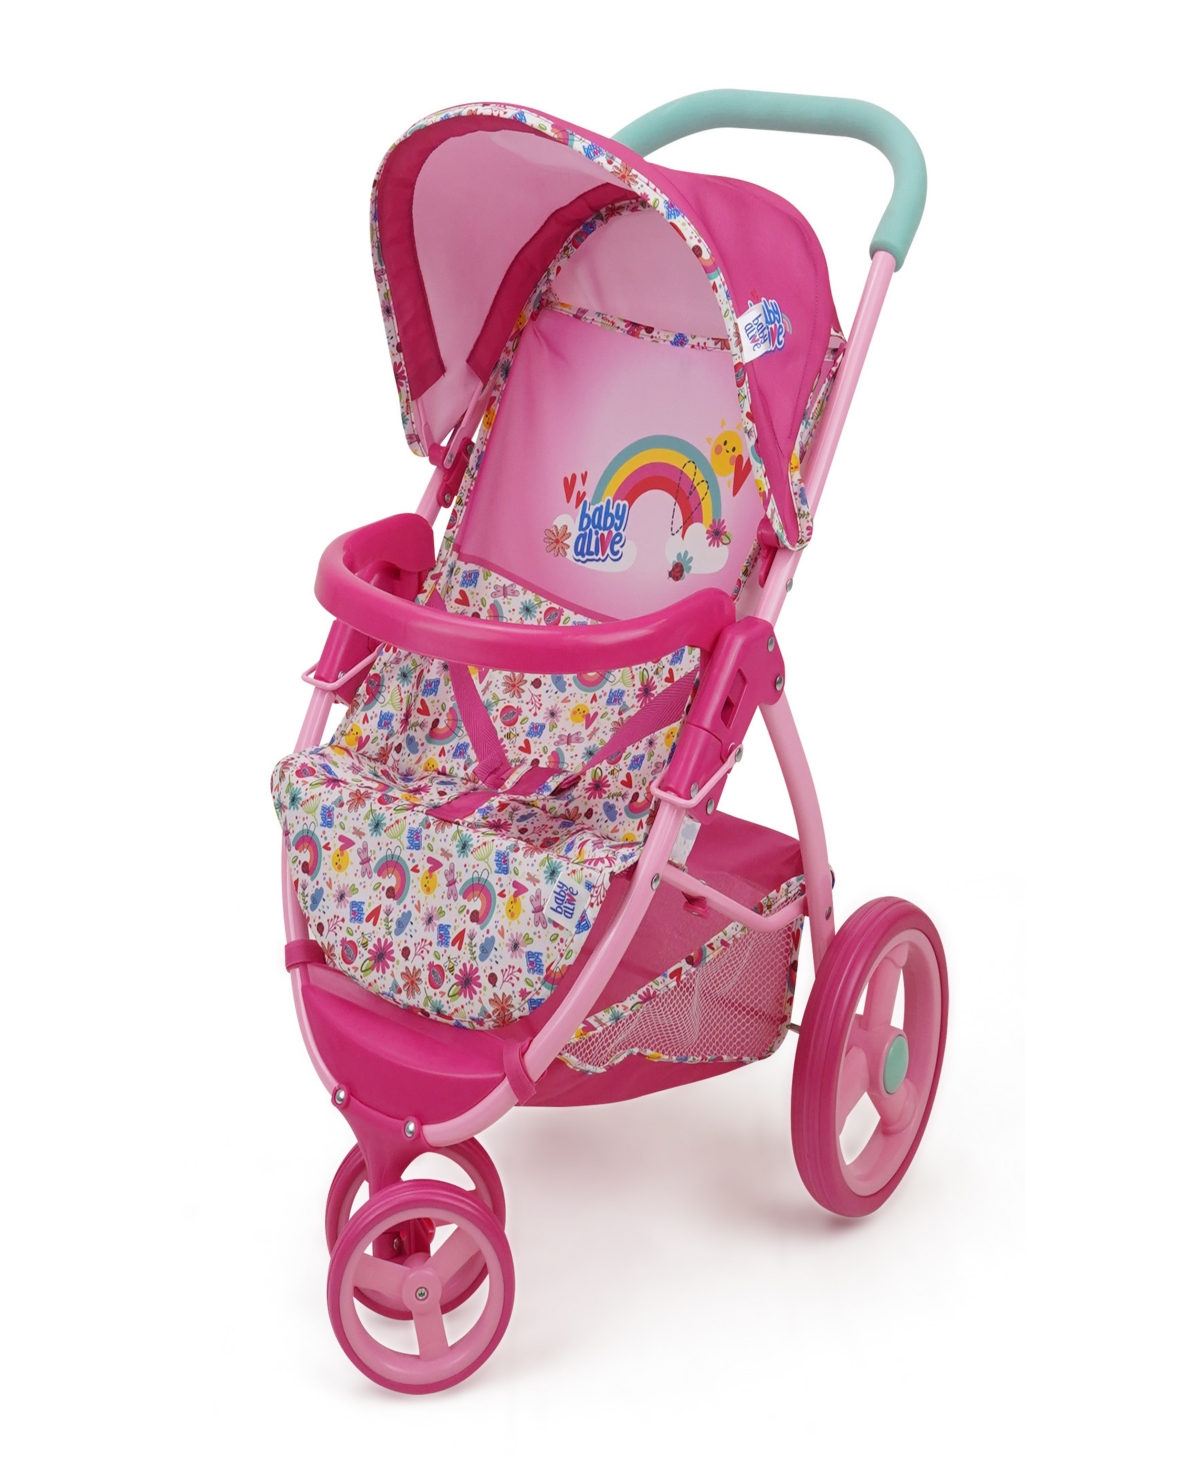 Baby Alive Pink And Rainbow Doll Jogging Stroller In Multi